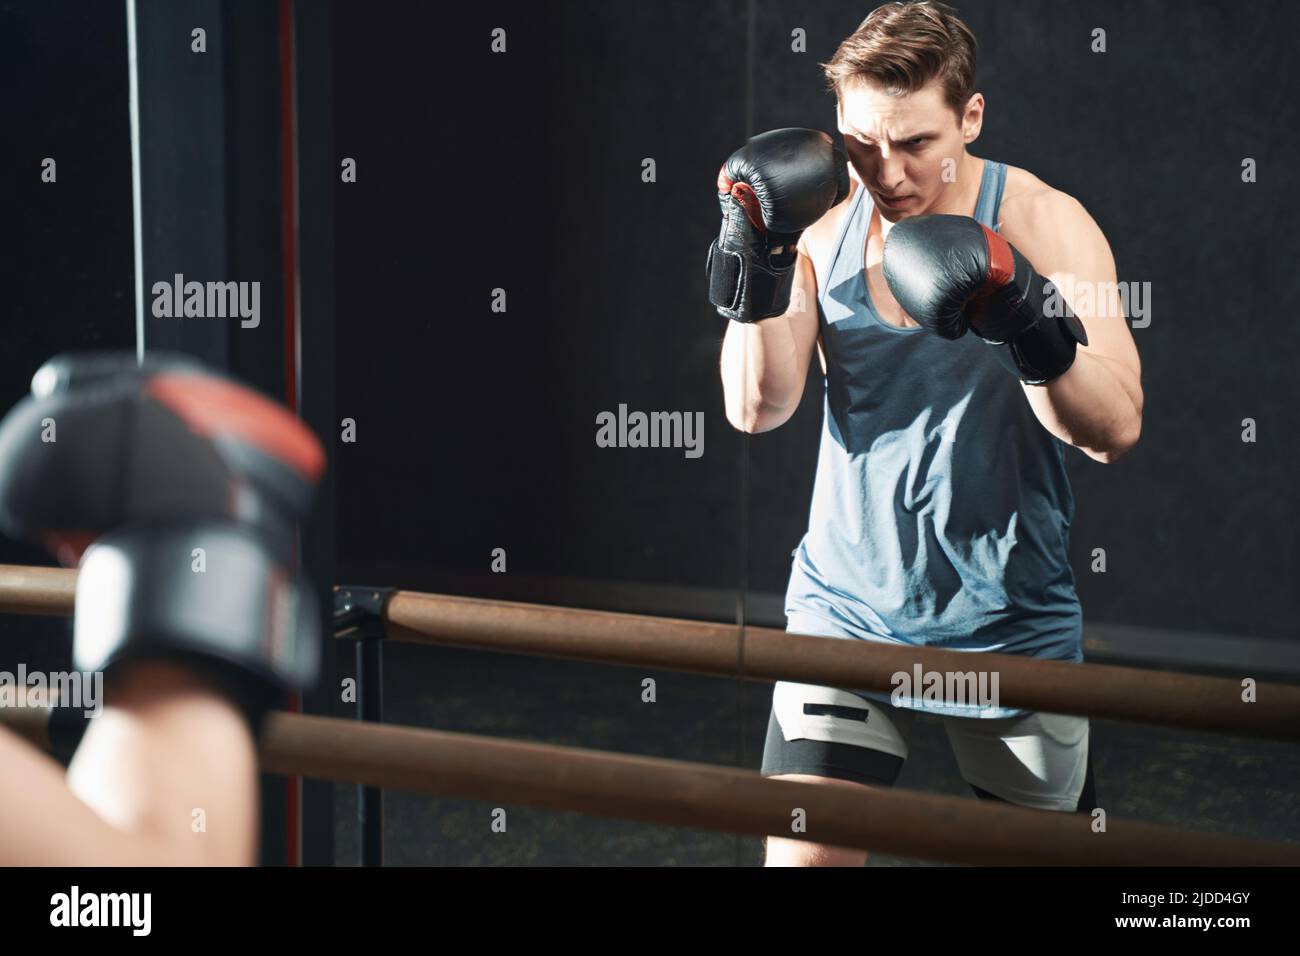 Purposeful professional boxer working out at gym Stock Photo